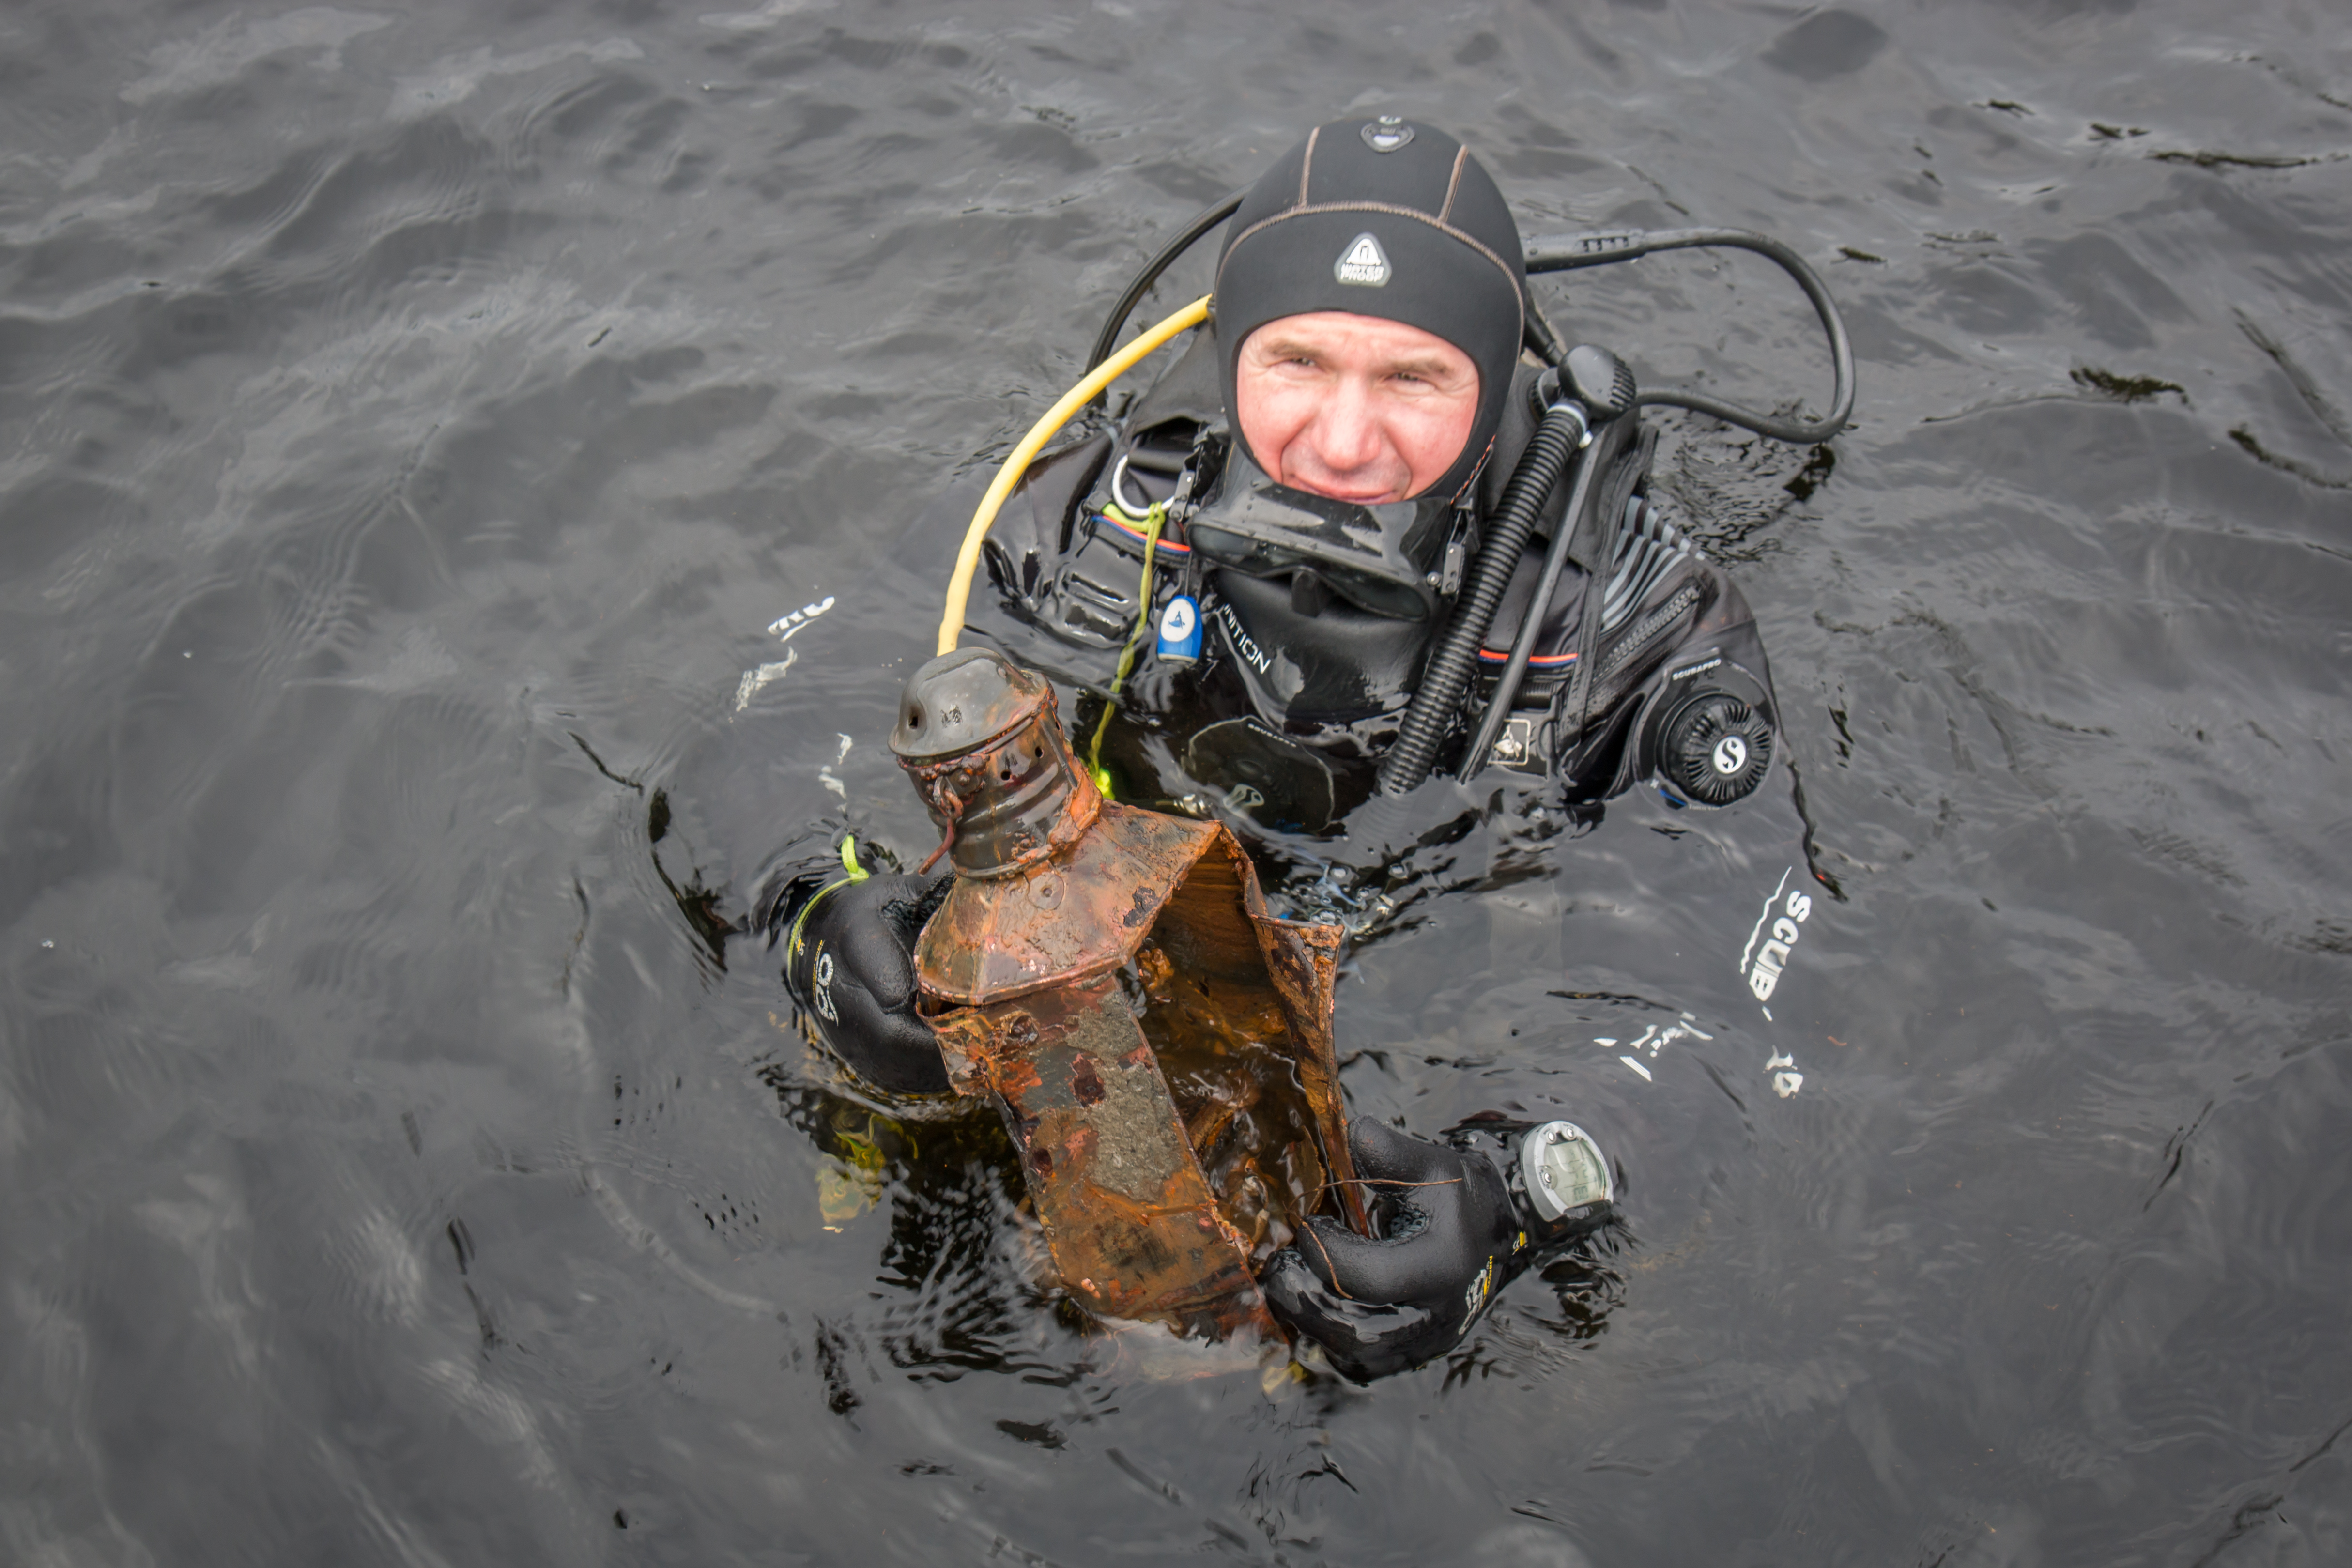 Diver with navigation lamp salvaged from the Valamon Luostari wreck. Photo by Stanislav Trofimov.